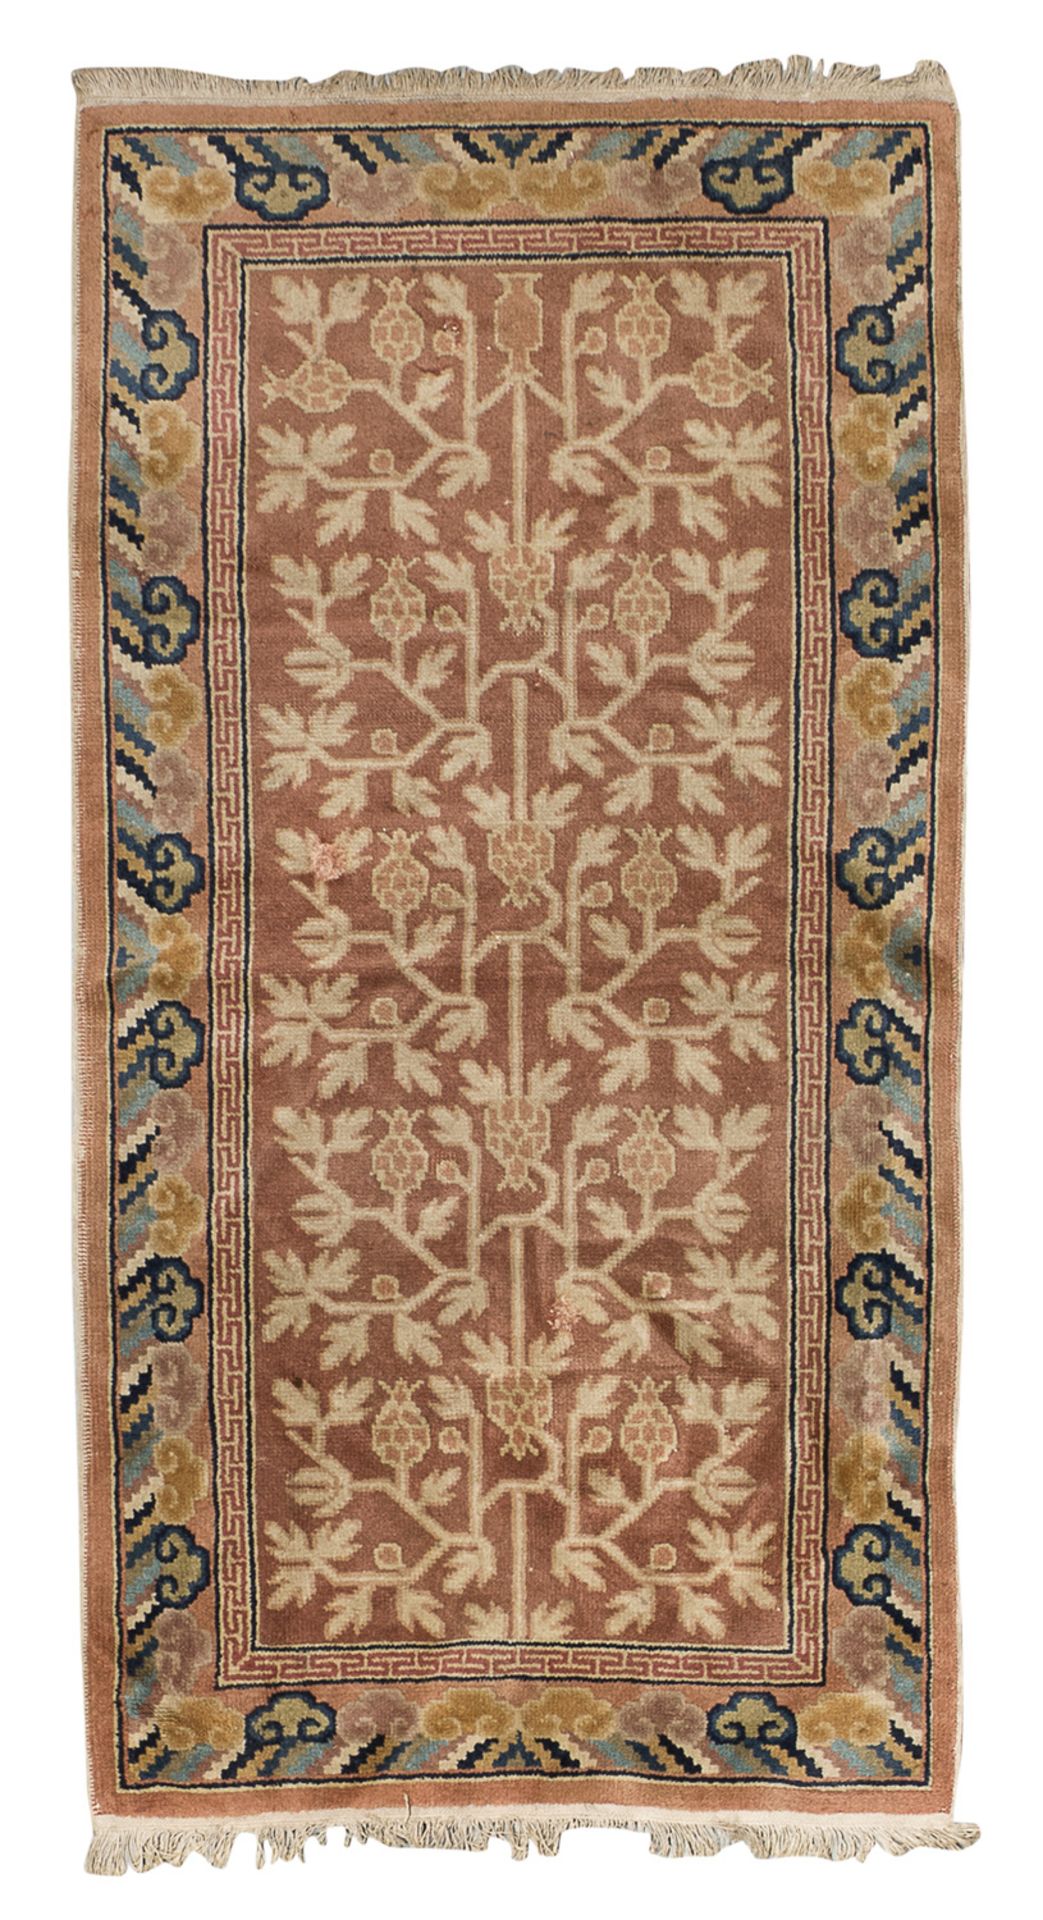 SMALL CHINESE RUG PROBABLY TIEN-TSIN LATE 19th CENTURY